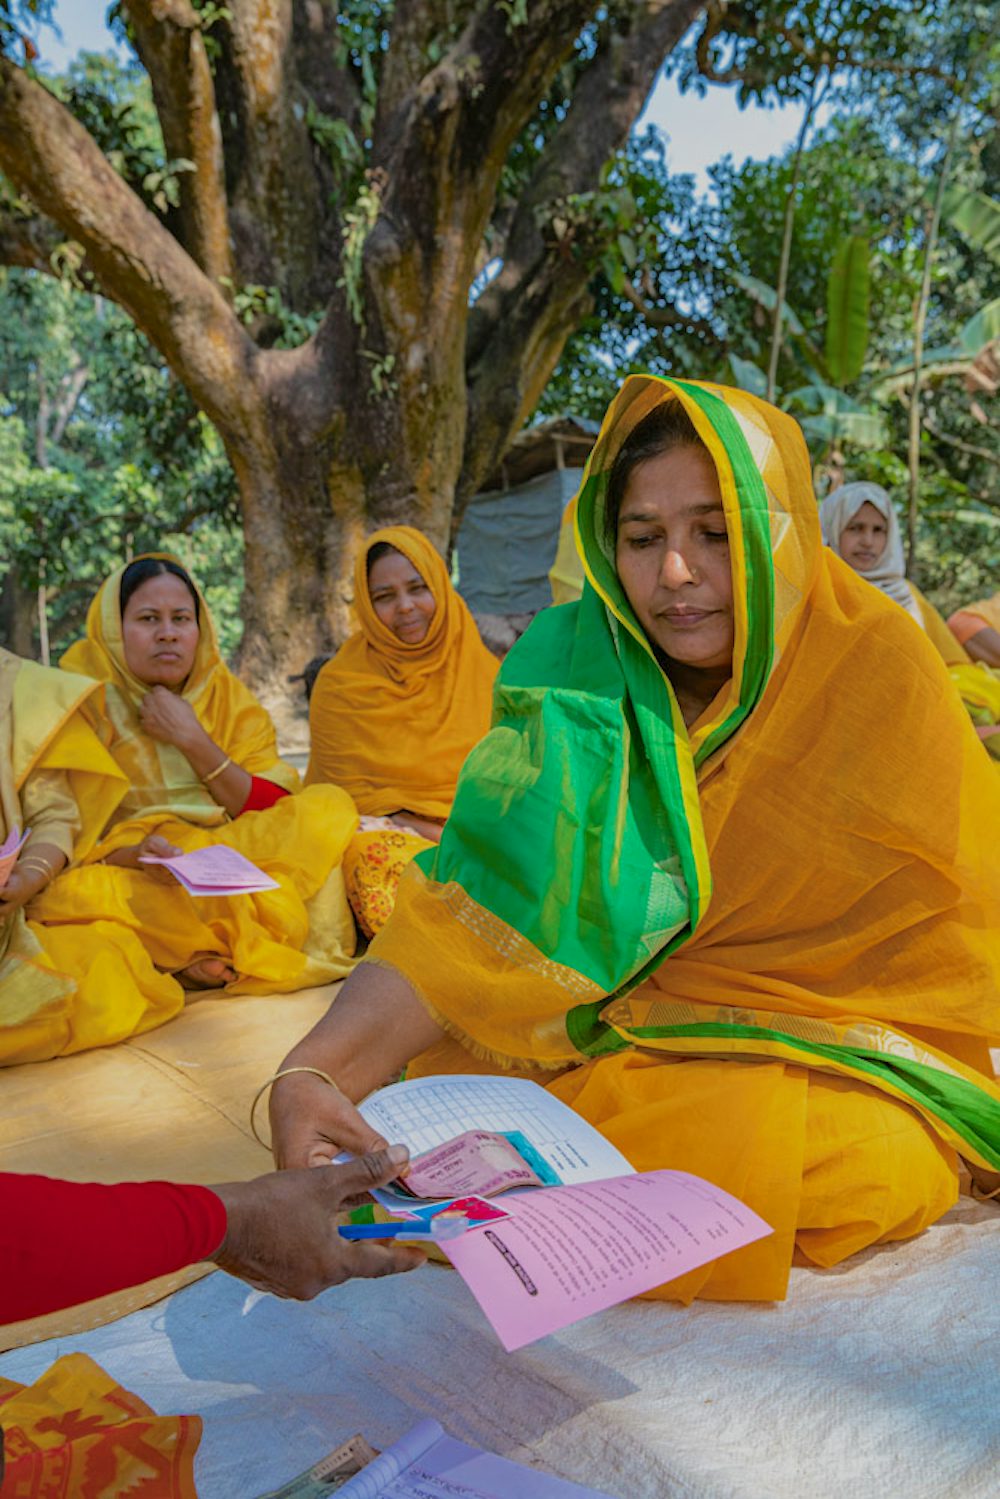 A woman in a yellow and green saree sits on the ground, reading a pamphlet, with other women in yellow sarees in the background.